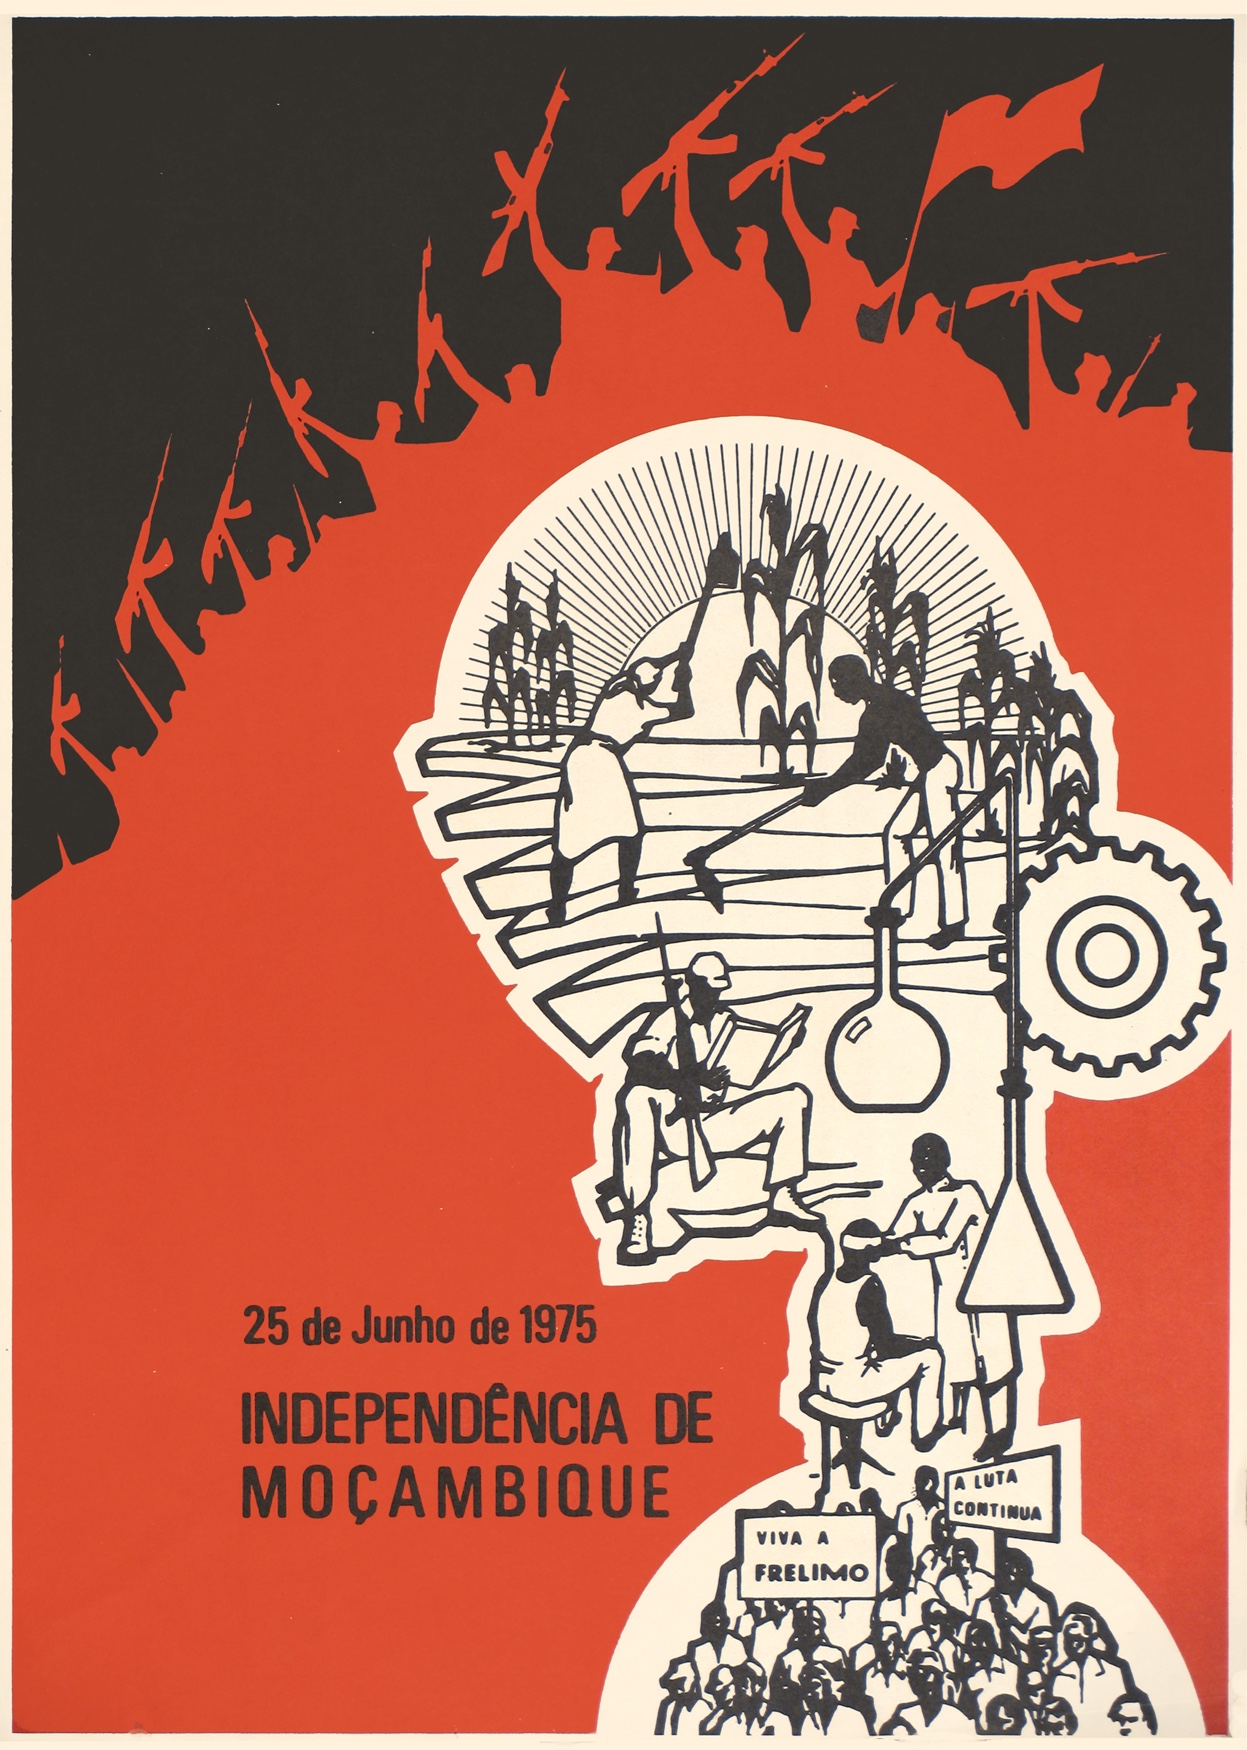 1975, 25th of June 1975, Independence of Mozambique